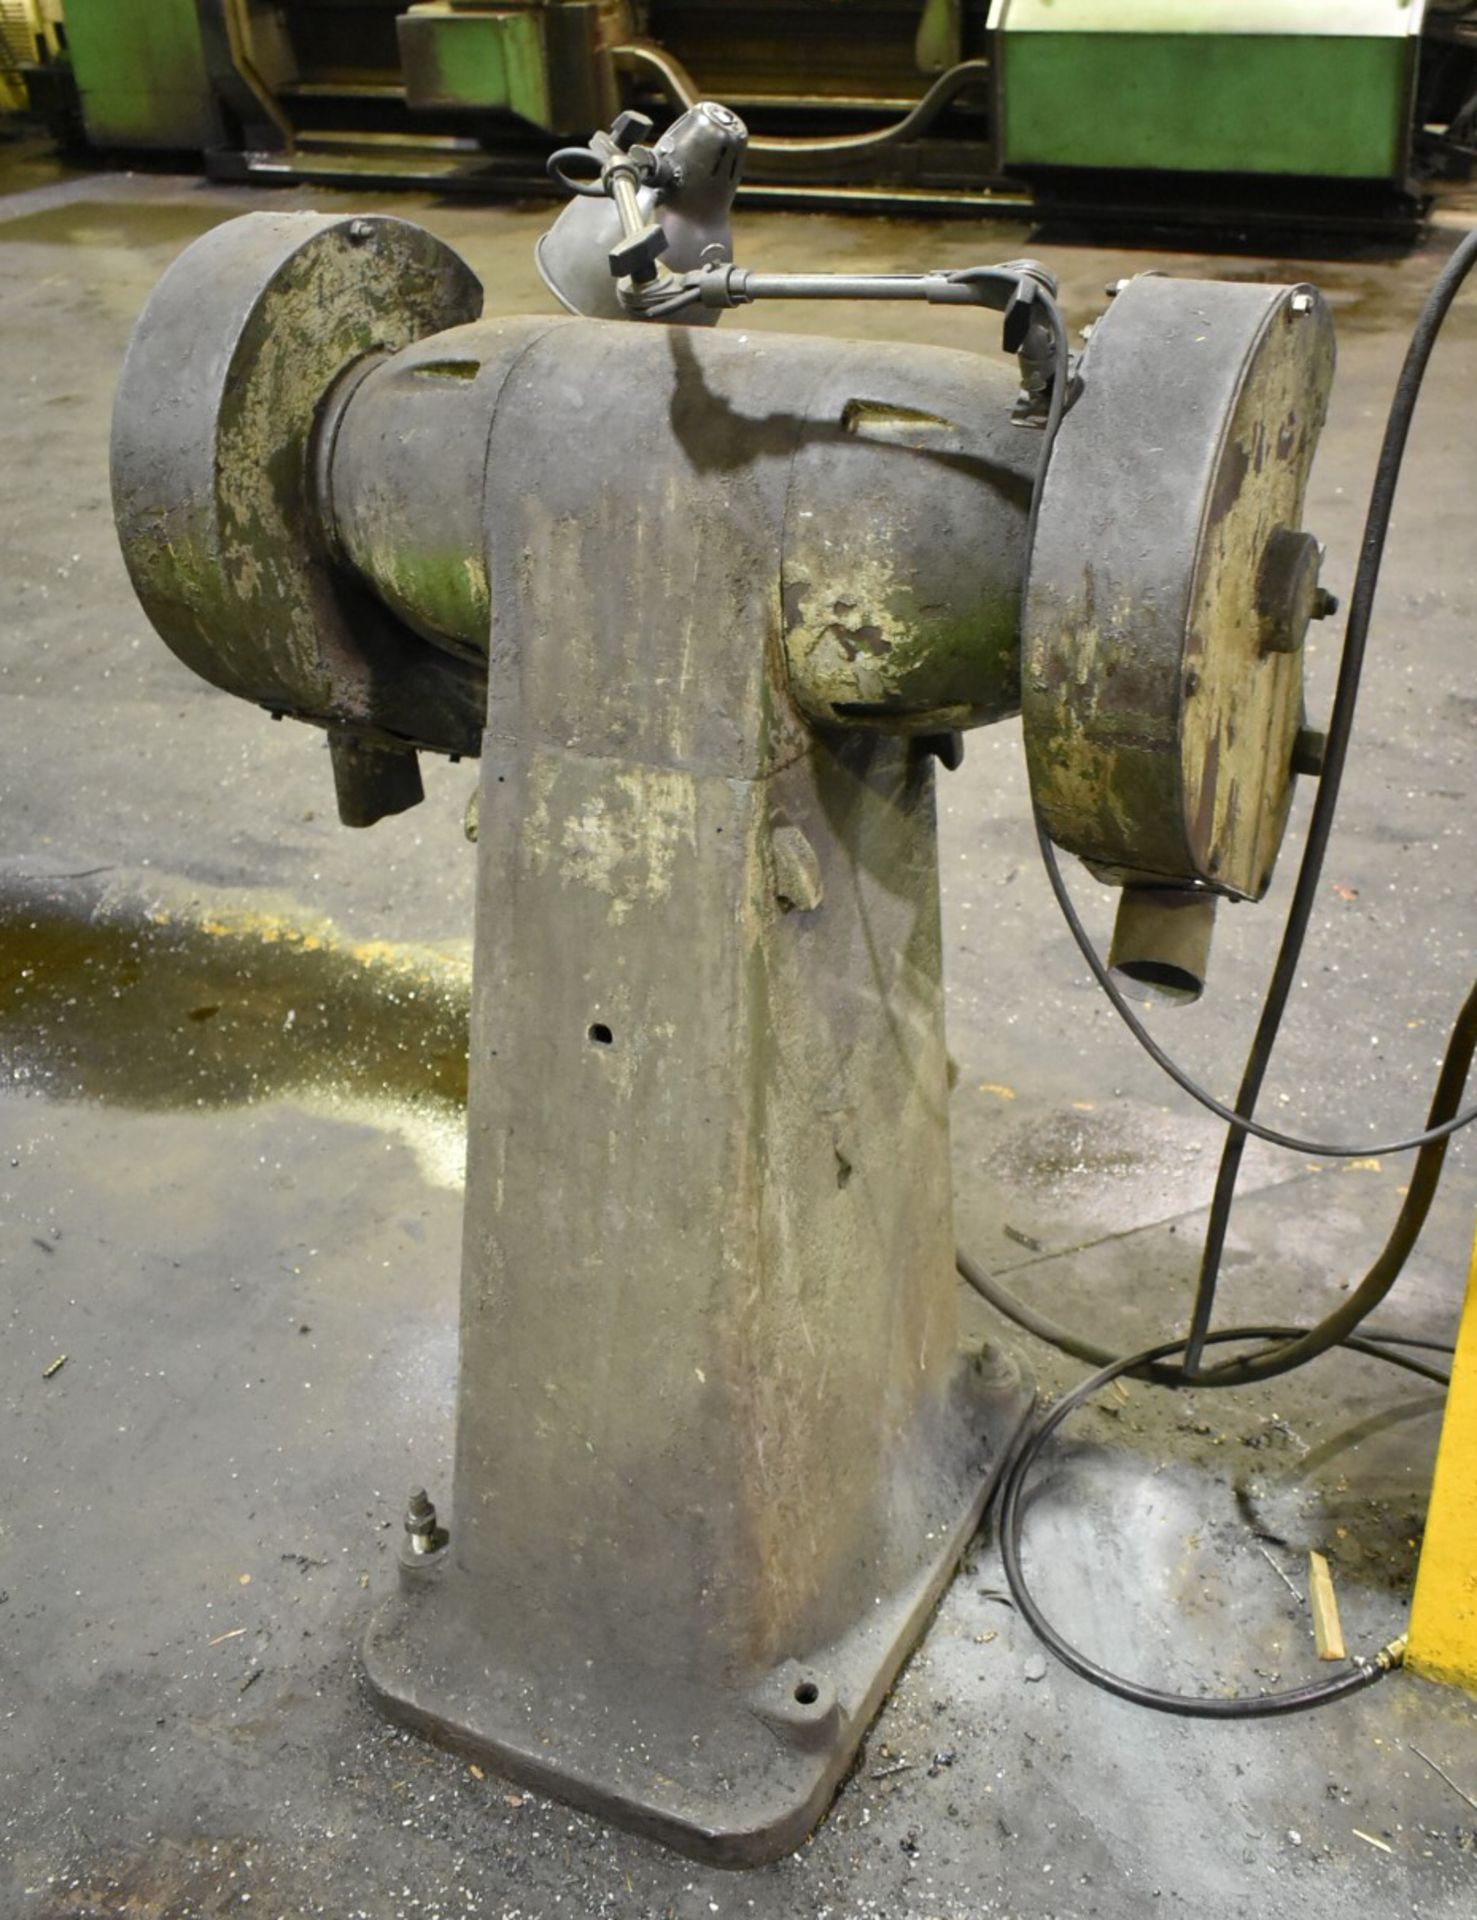 STAMFORD 12" DOUBLE END PEDESTAL GRINDER WITH SPEEDS TO 1750 RPM, S/N: 3199/1 (CI) [RIGGING FEE - Image 2 of 3